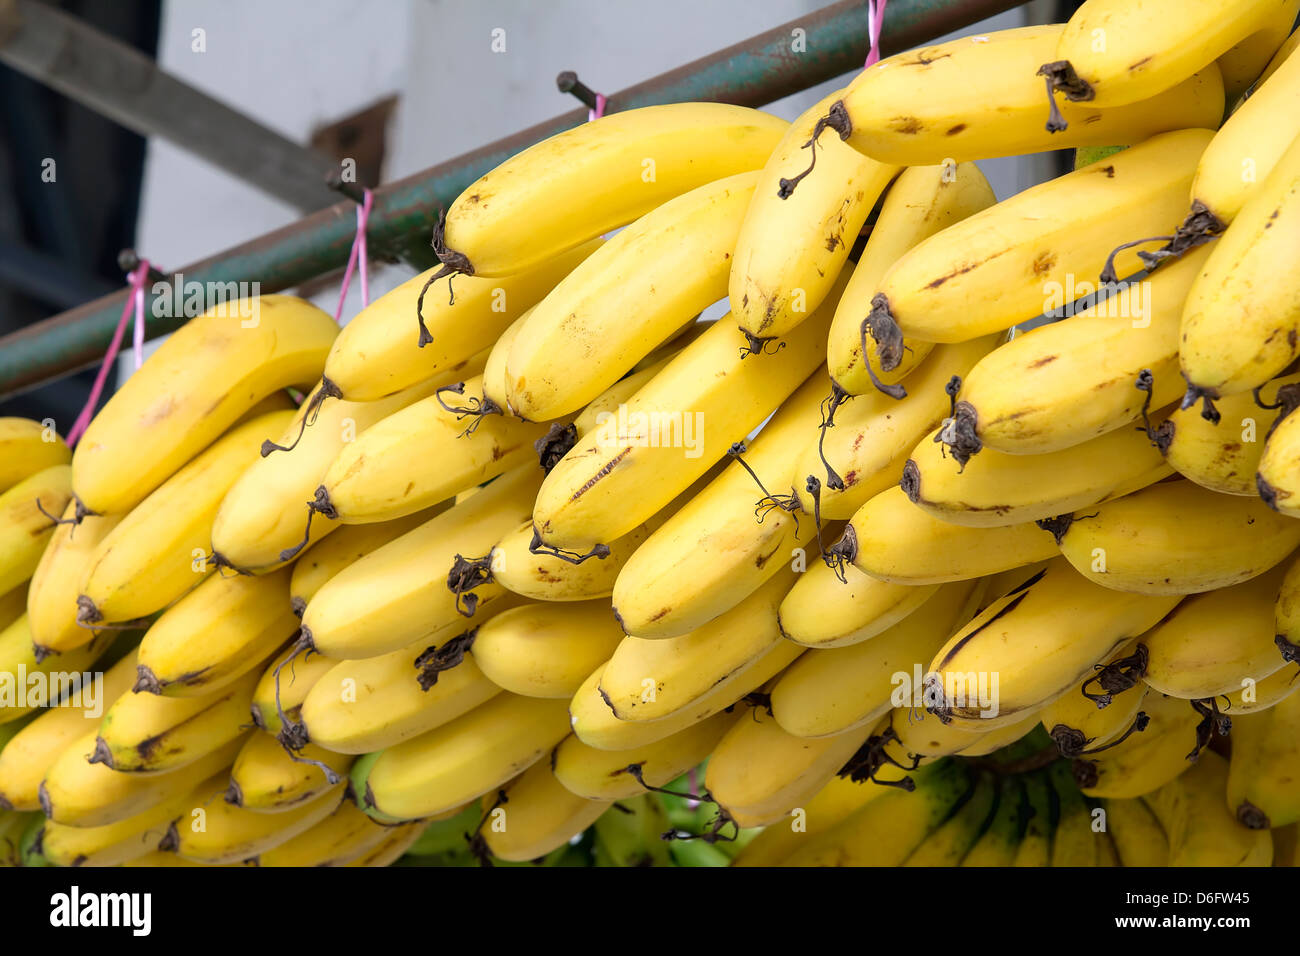 Bunches of Riped Yellow Bananas Hanging at Southeast Asian Fruits and Vegetables Market Stock Photo